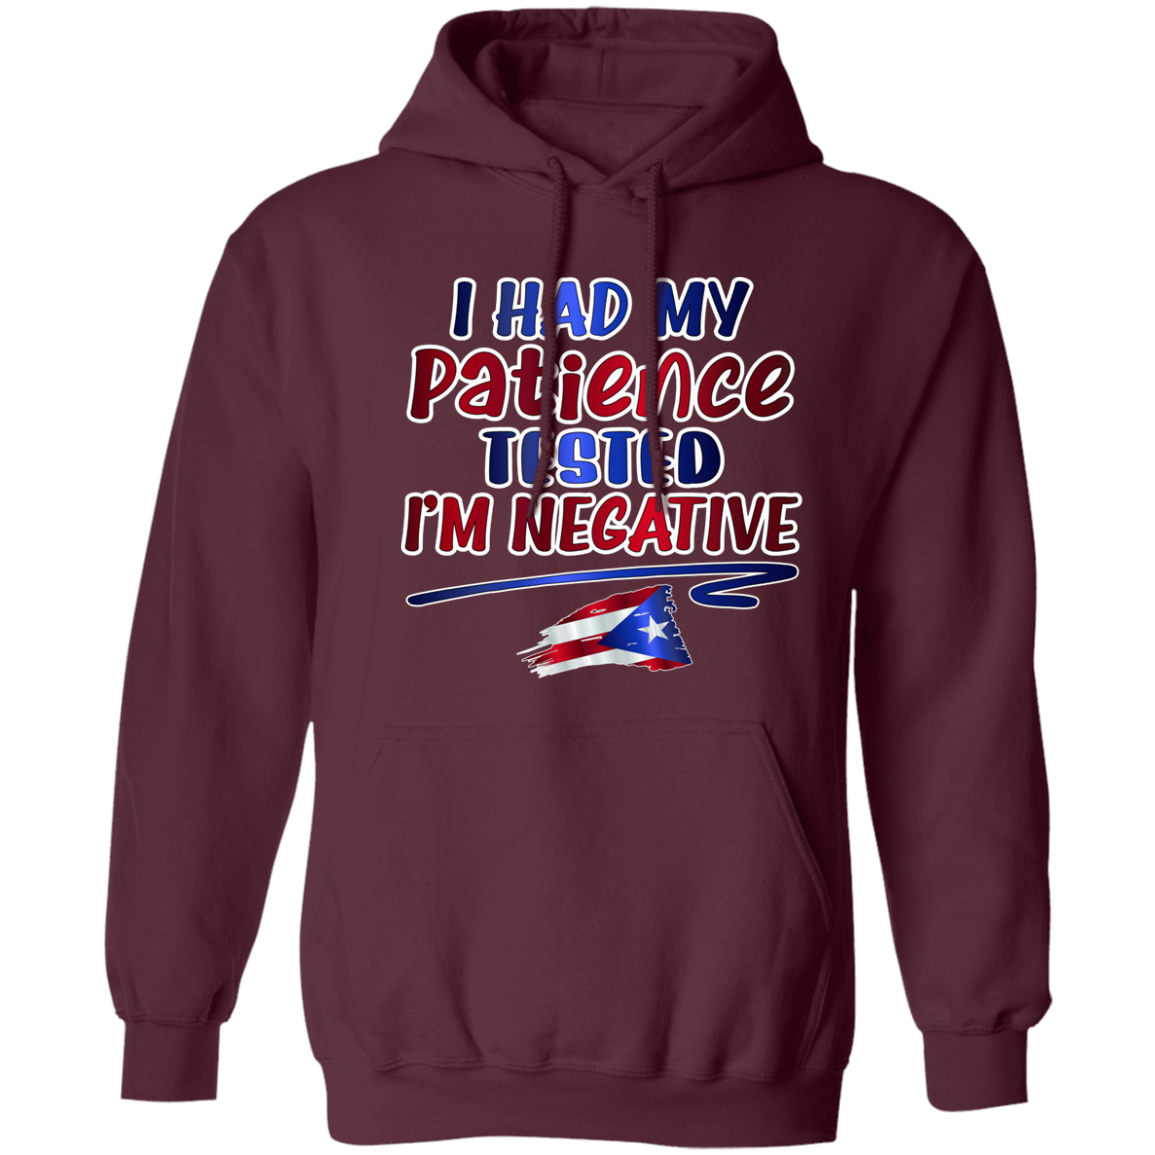 Patience Tested, I'm Negative Pullover Hoodie 8 oz